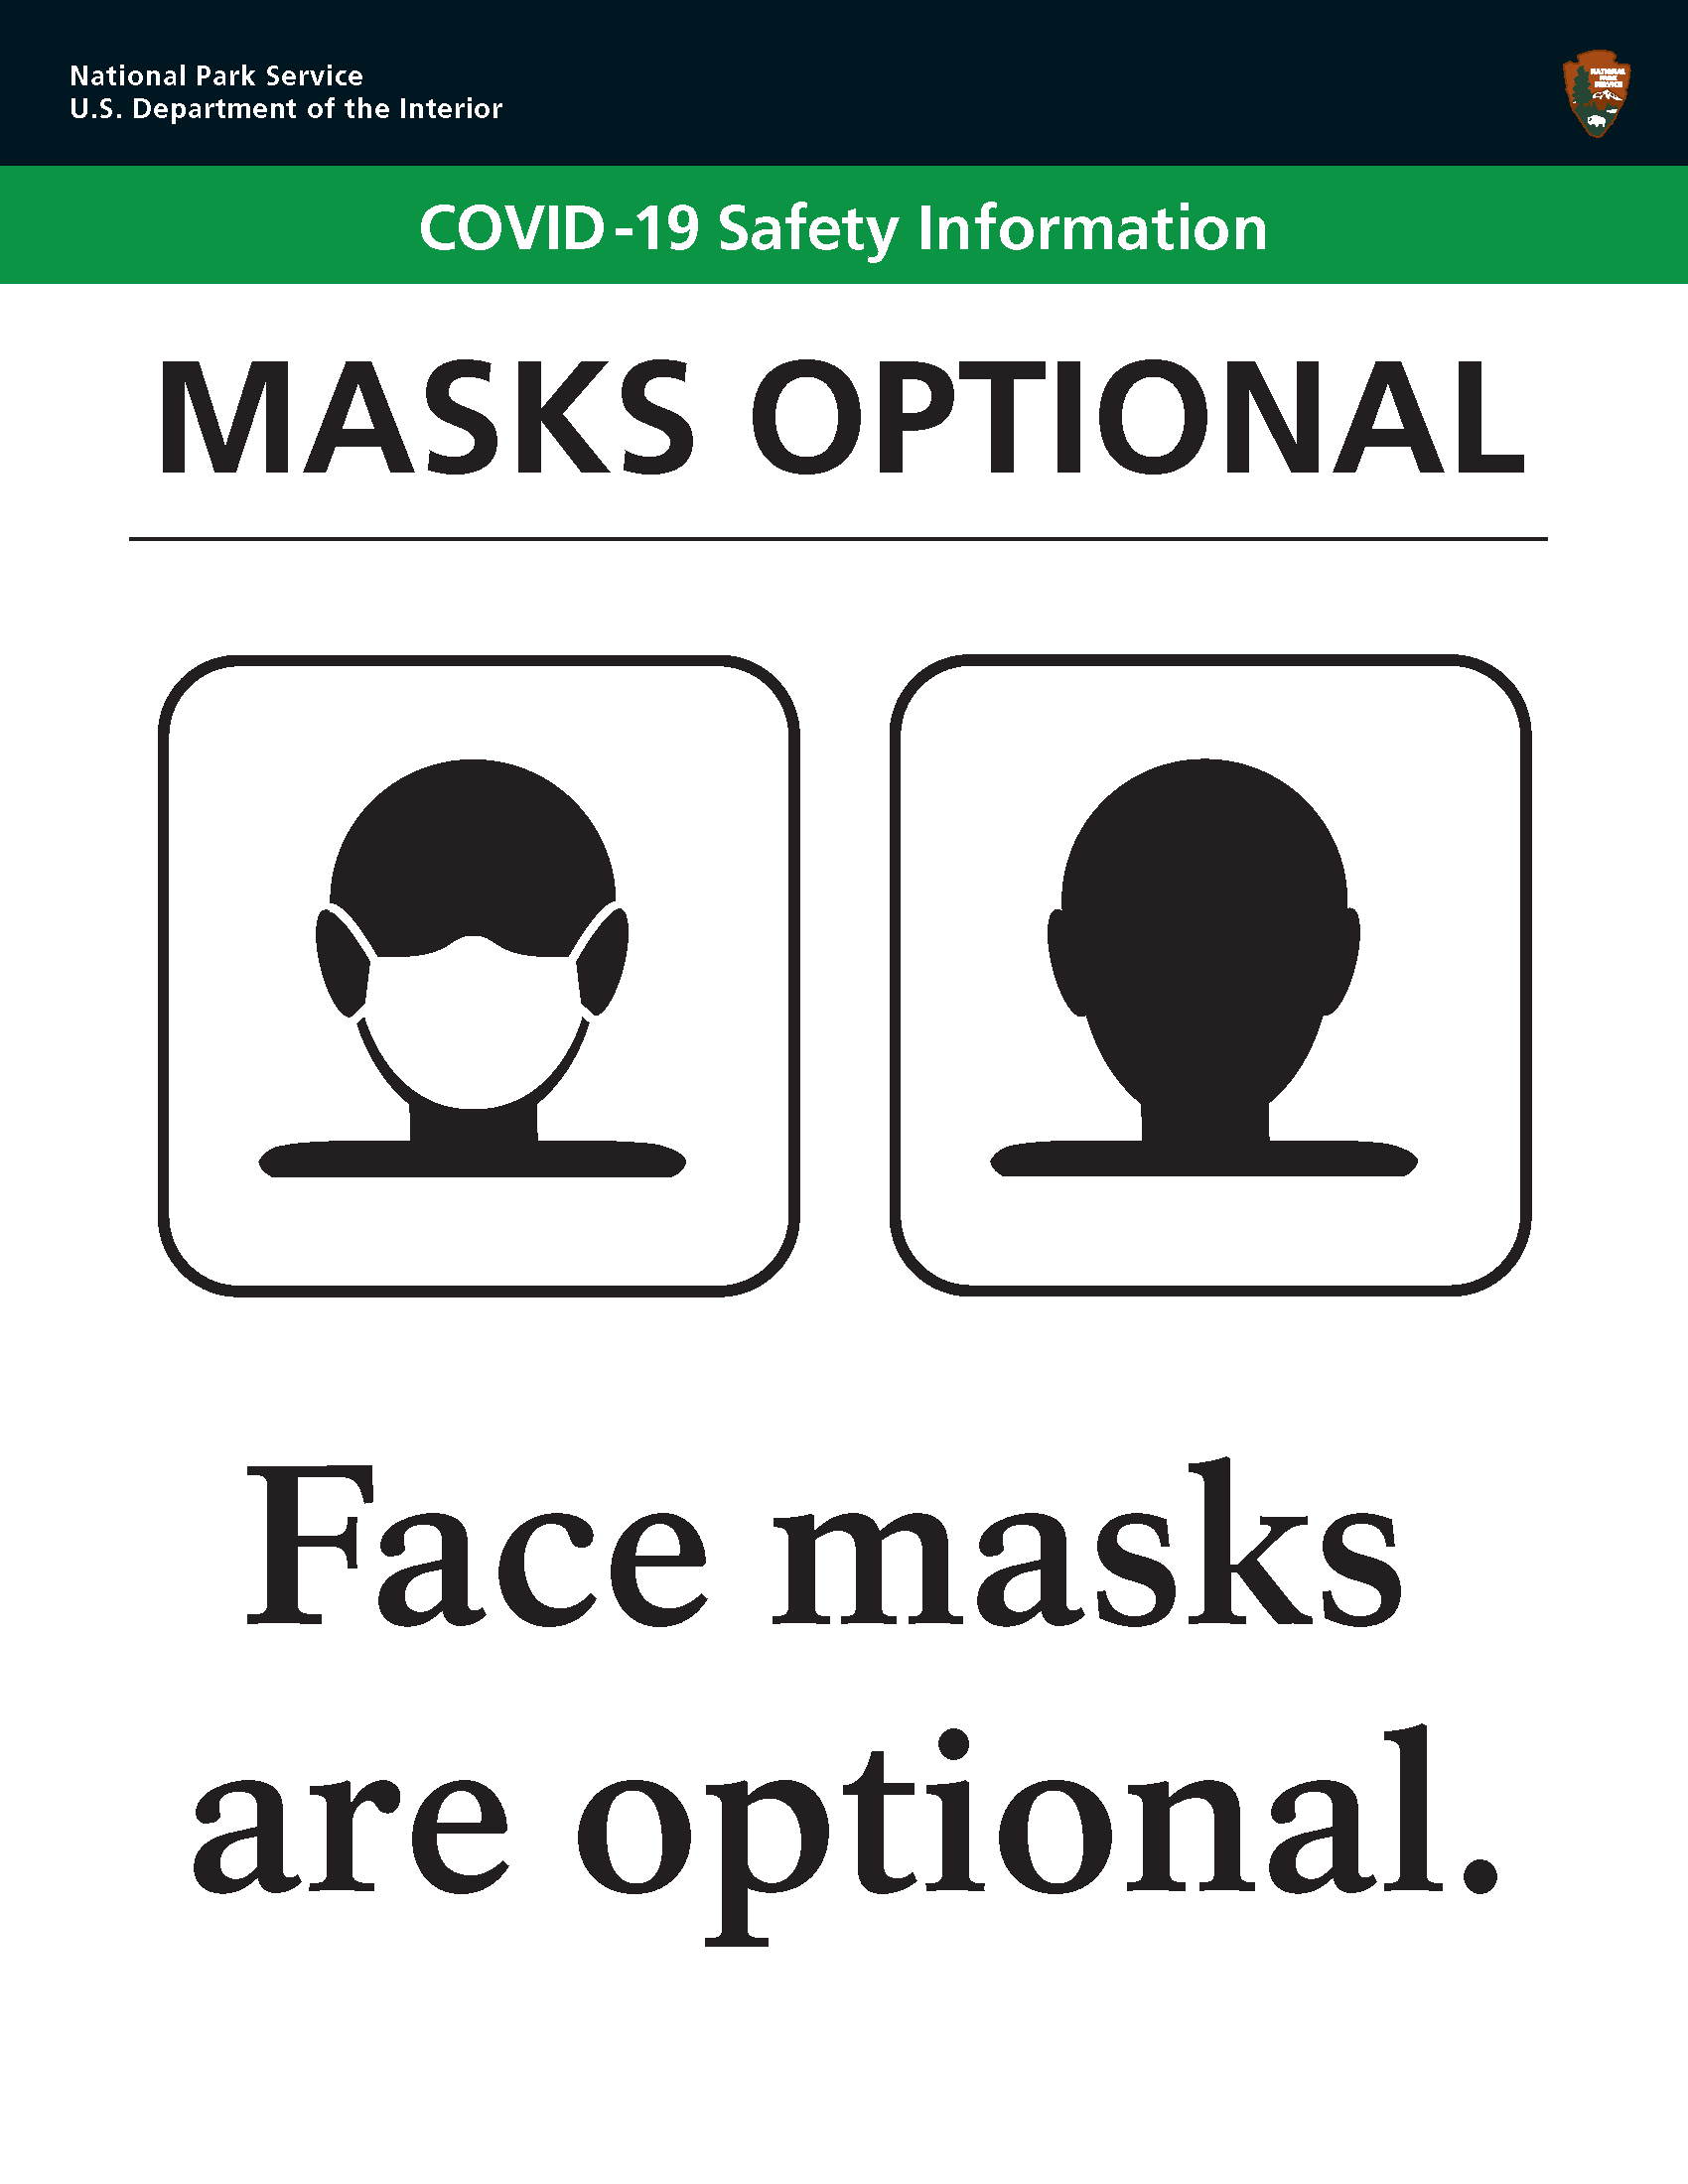 This illustration, created at Harpers Ferry center is an example of a sign for parks where face masks are optional.